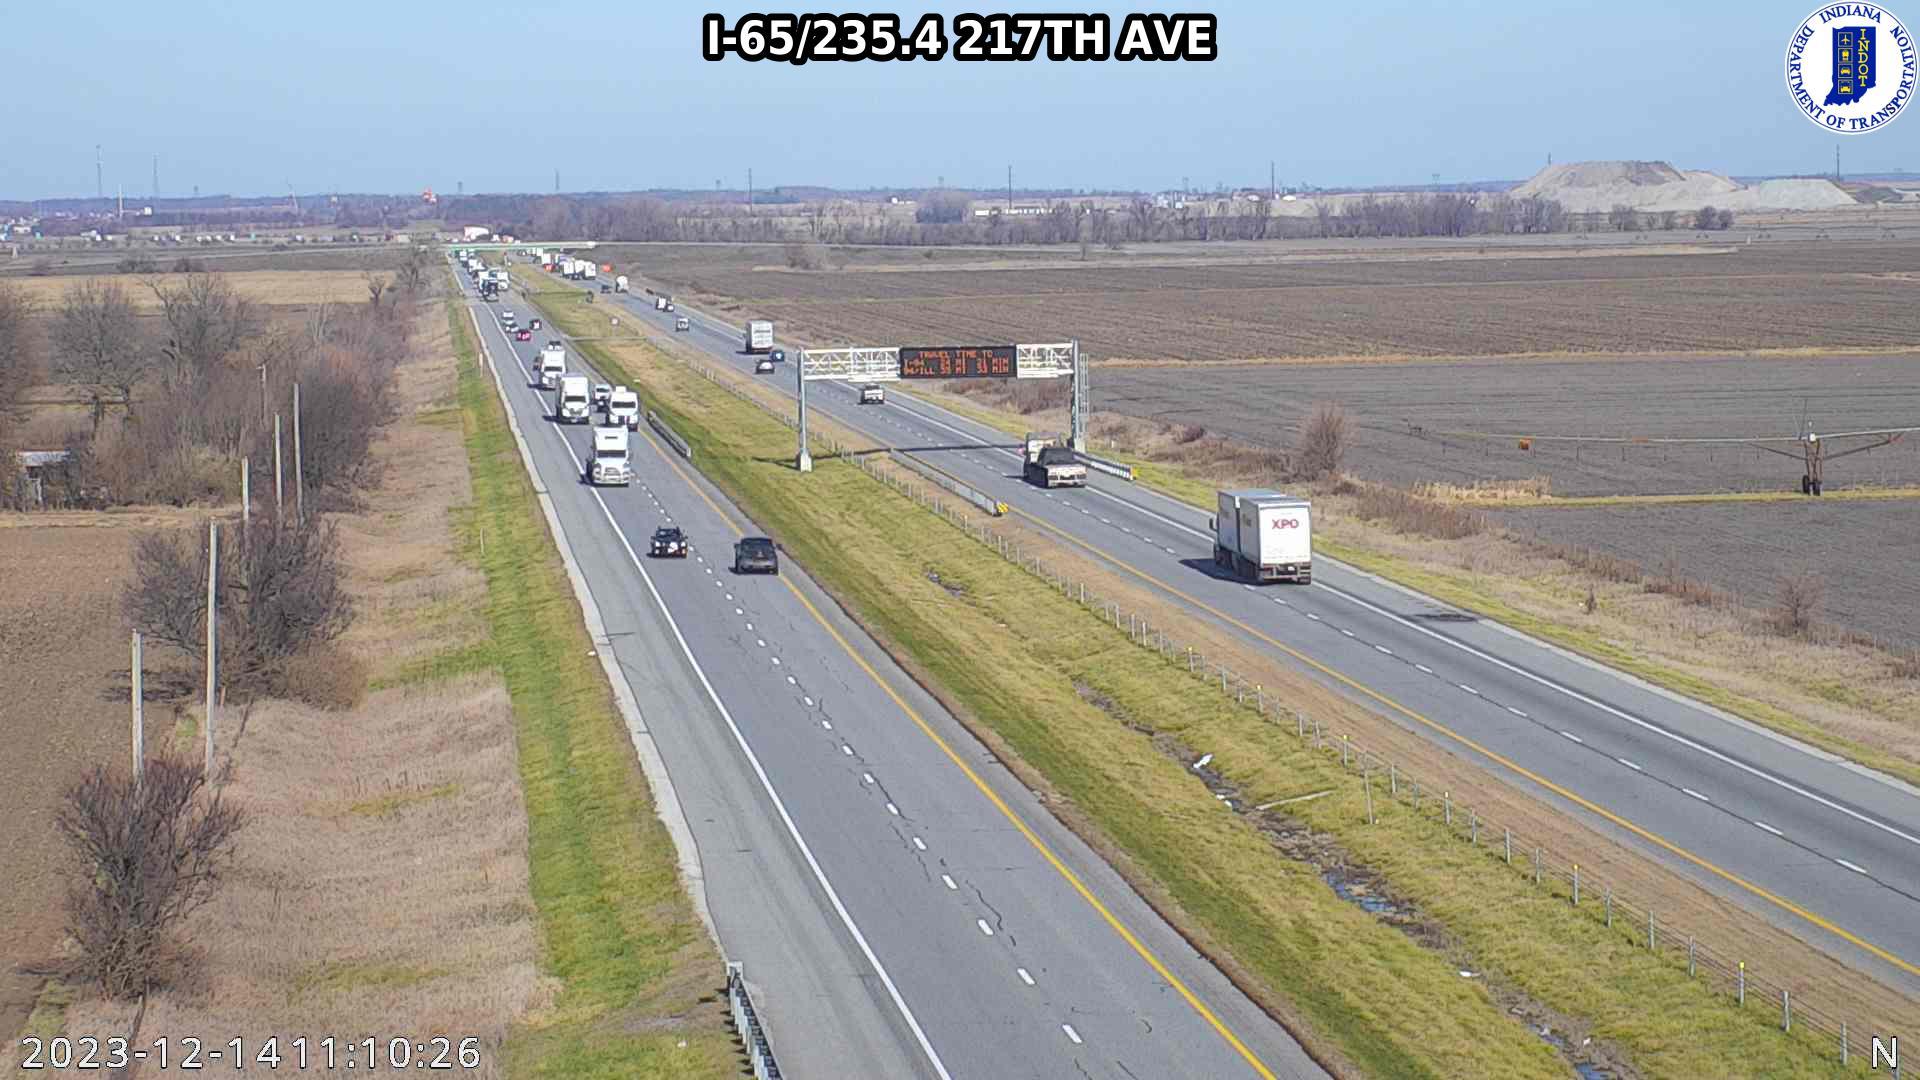 Traffic Cam Forest City: I-65: I-65/235.4 217TH AVE : I-65/235.4 217TH AVE Player